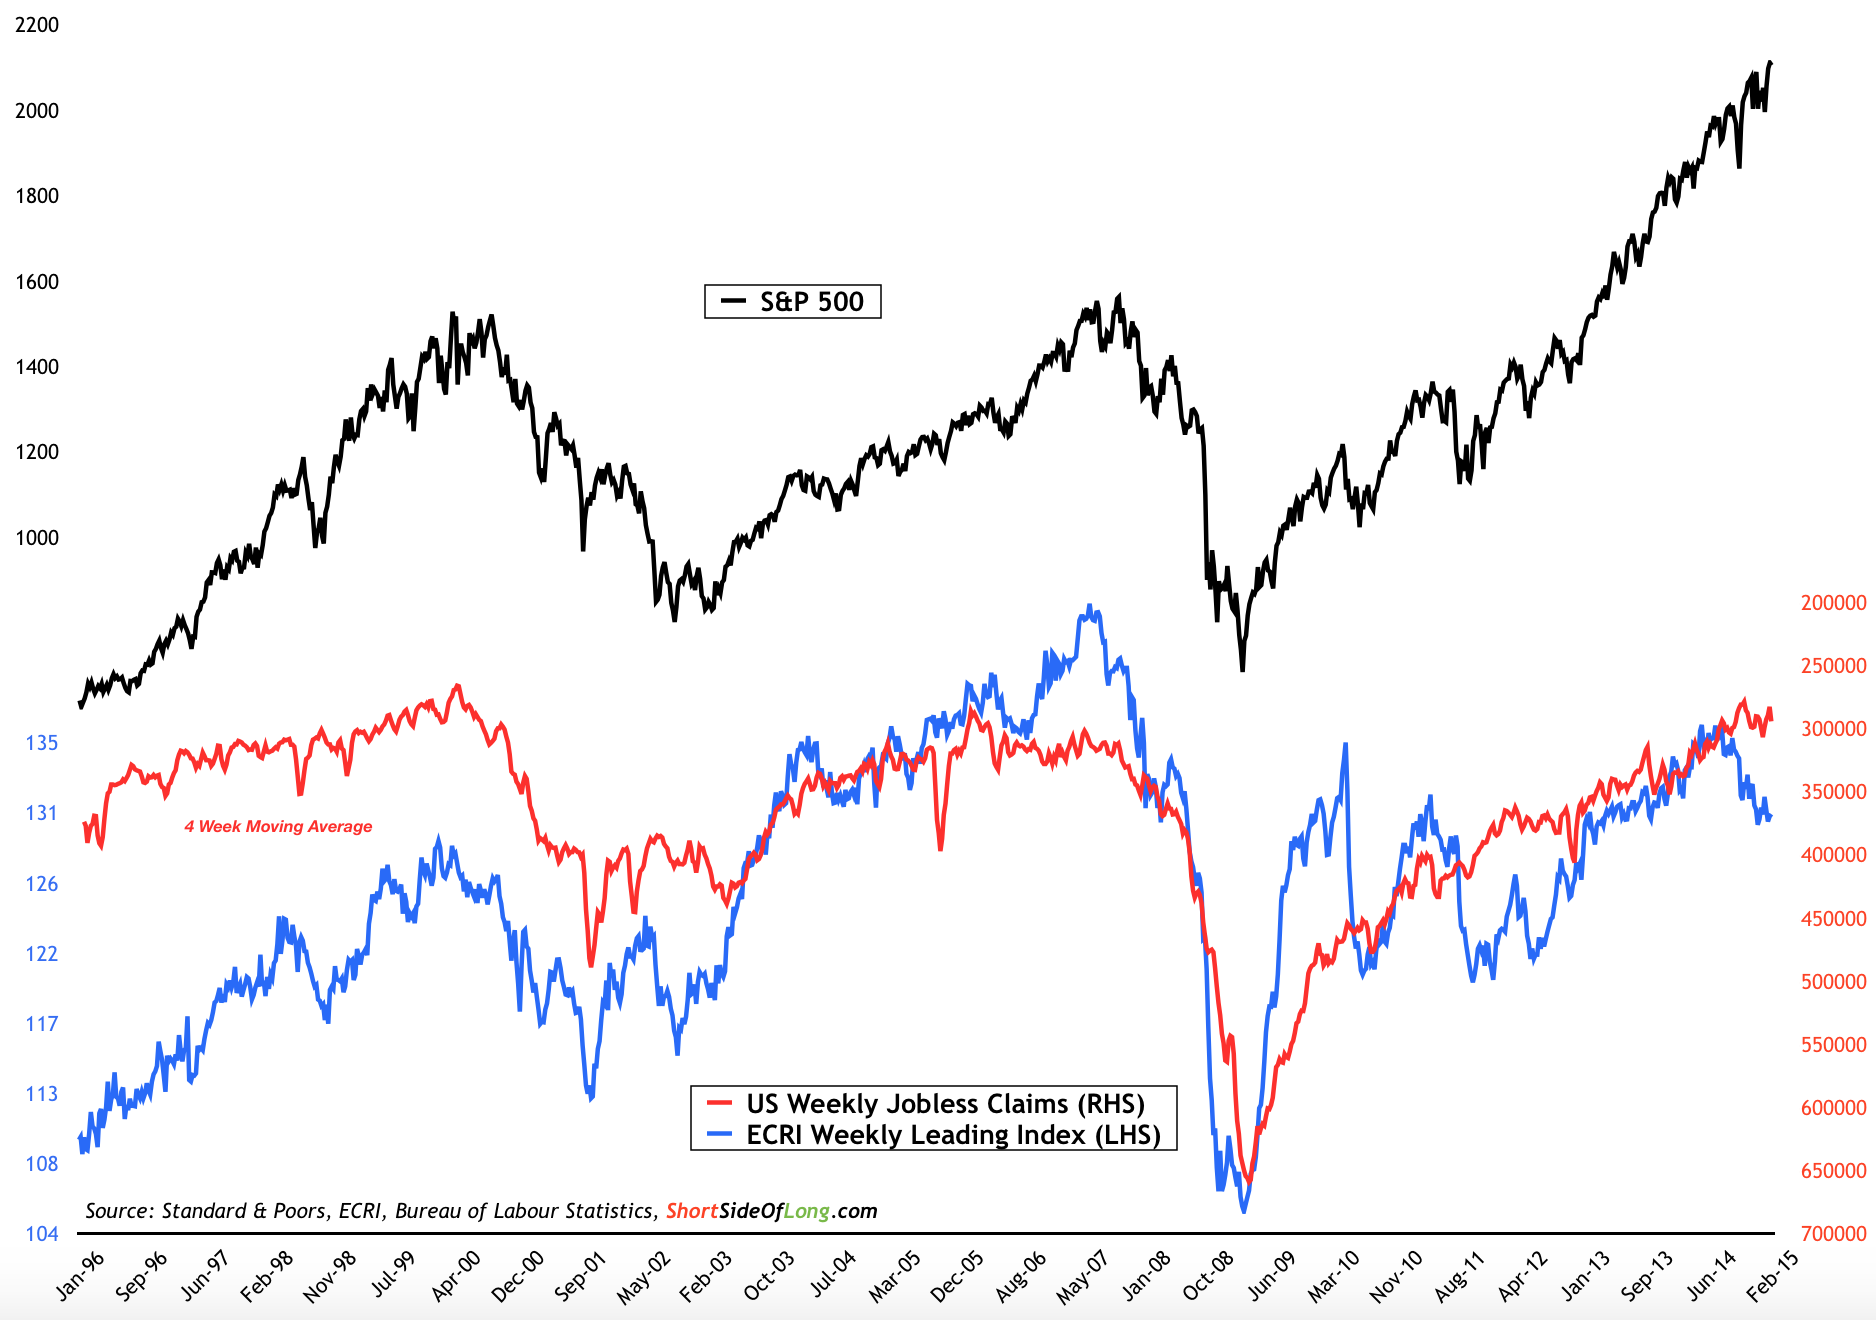 US Weekly Jobless Claims Vs. S&P 500 Index Chart